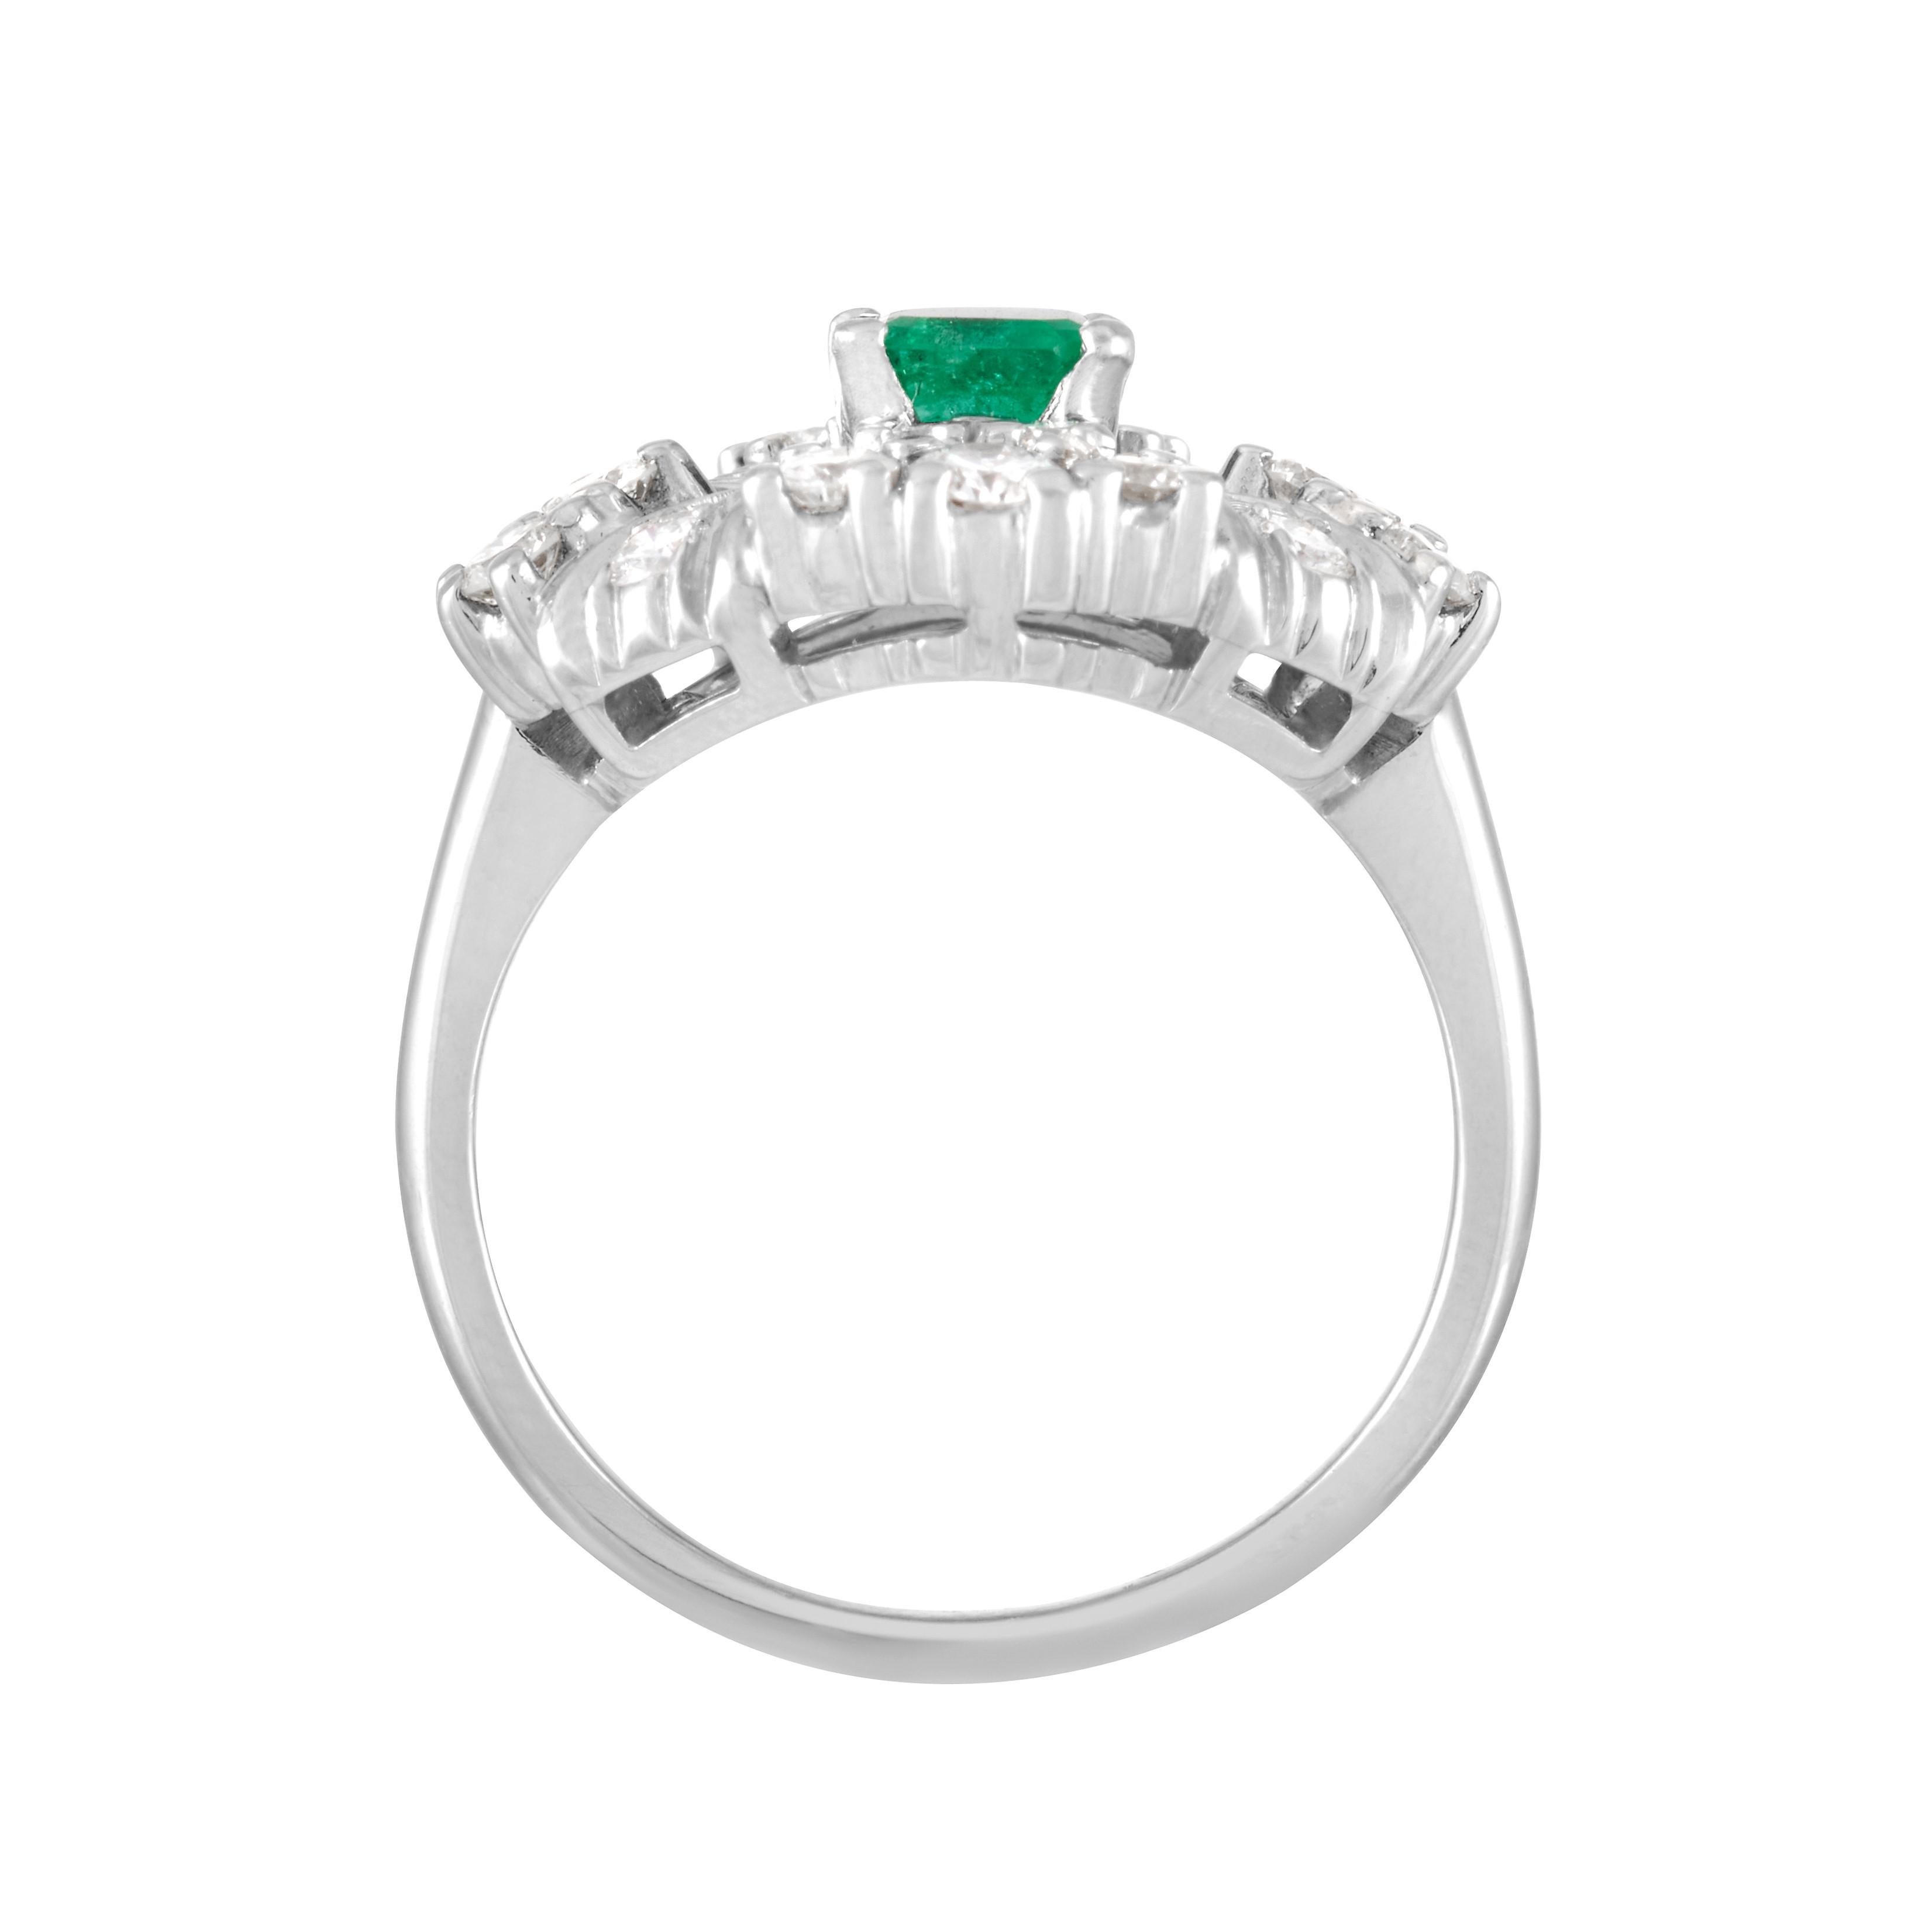 Bailey Banks & Biddle 0.50 Carat Emerald and Diamond Ring in Platinum In Good Condition In Philadelphia, PA